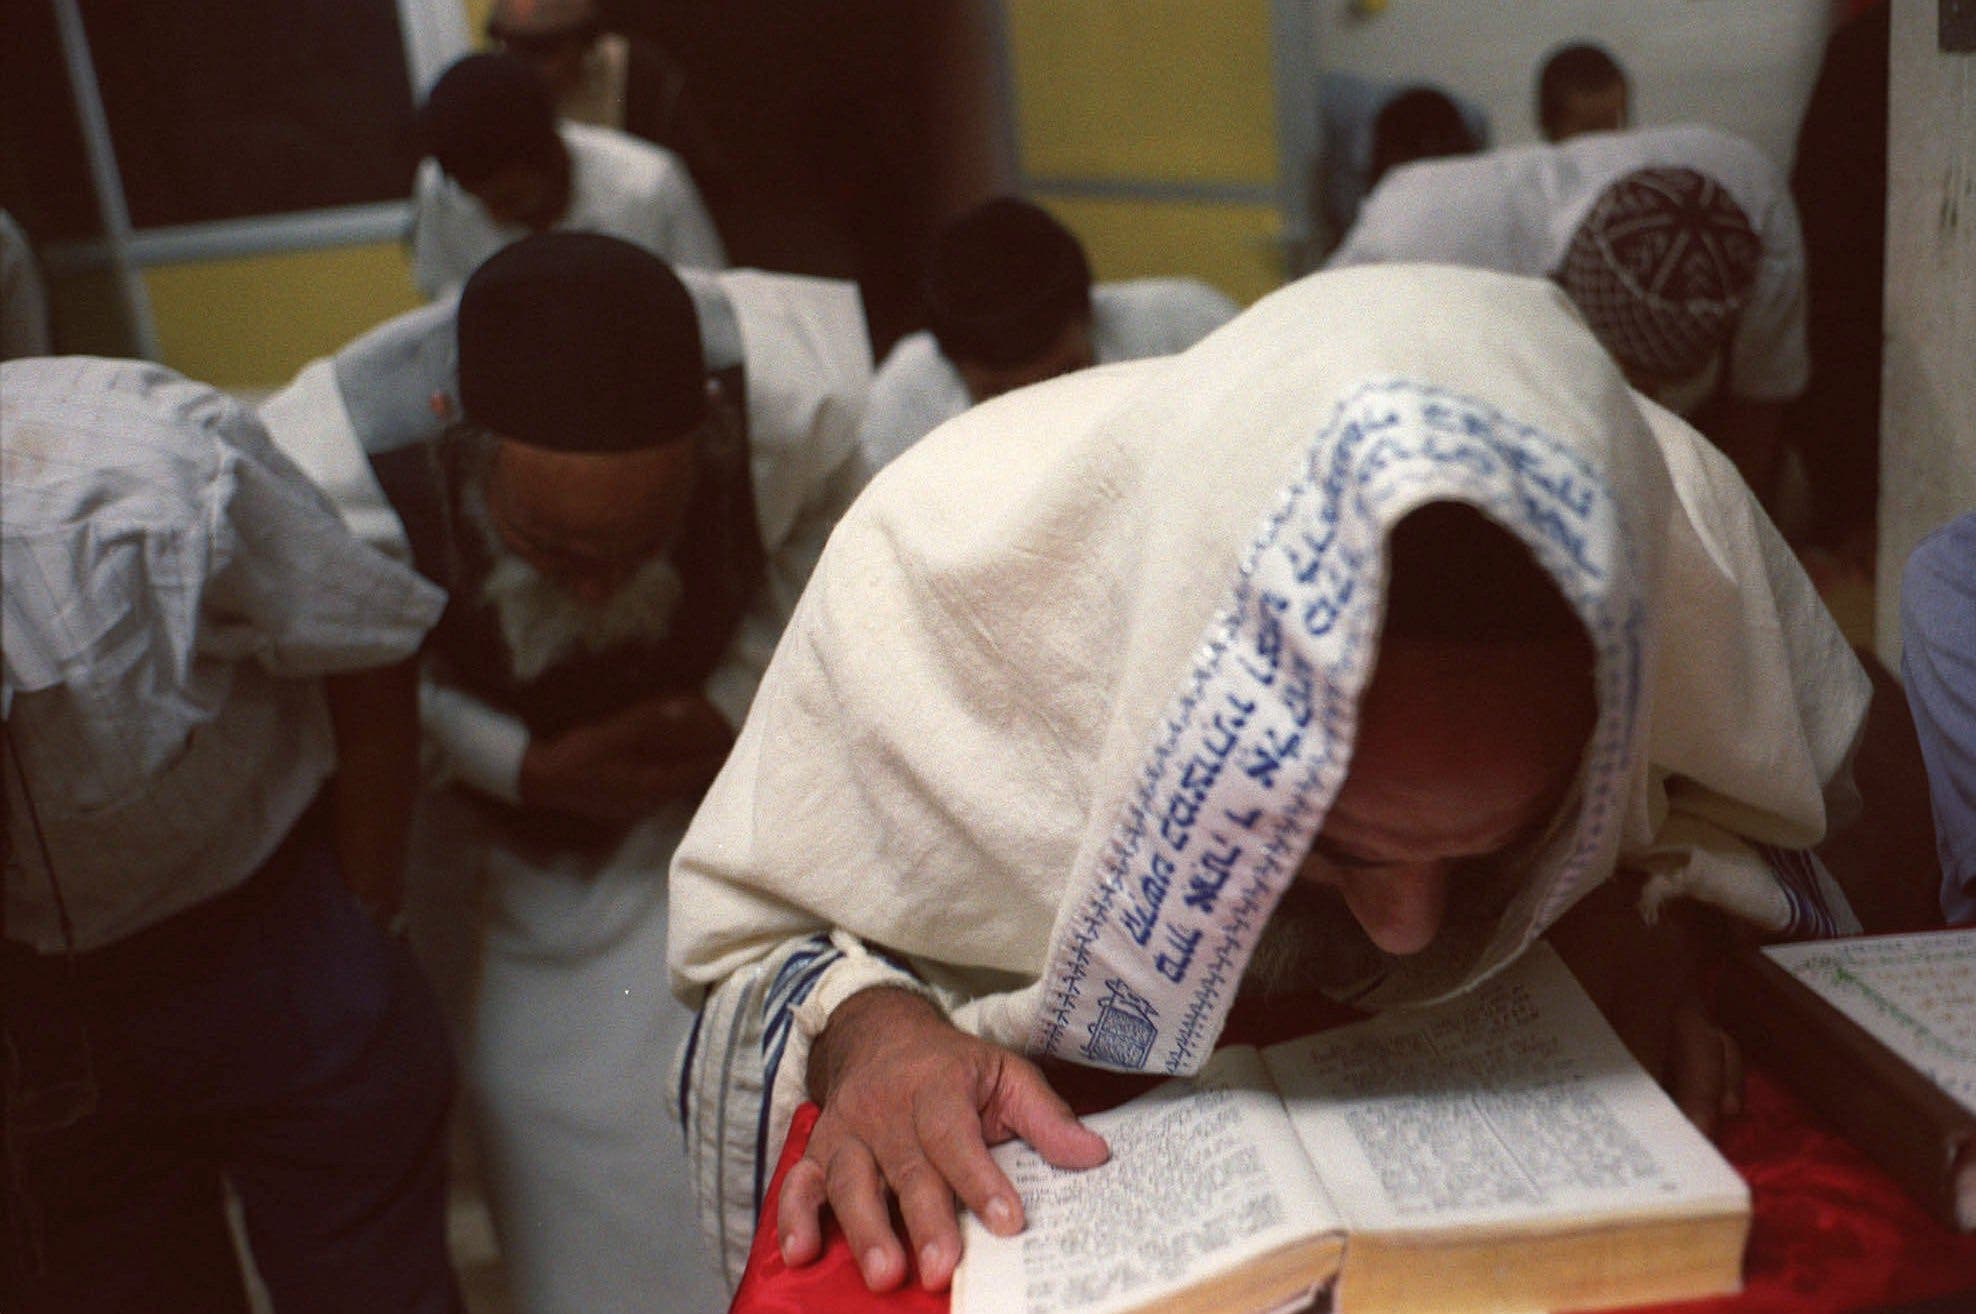 Yemenite Jews bow as they pray in the synagogue at the Oshiot neighborhood in Rehovot, Israel, Sept. 17, 1997. (AP)